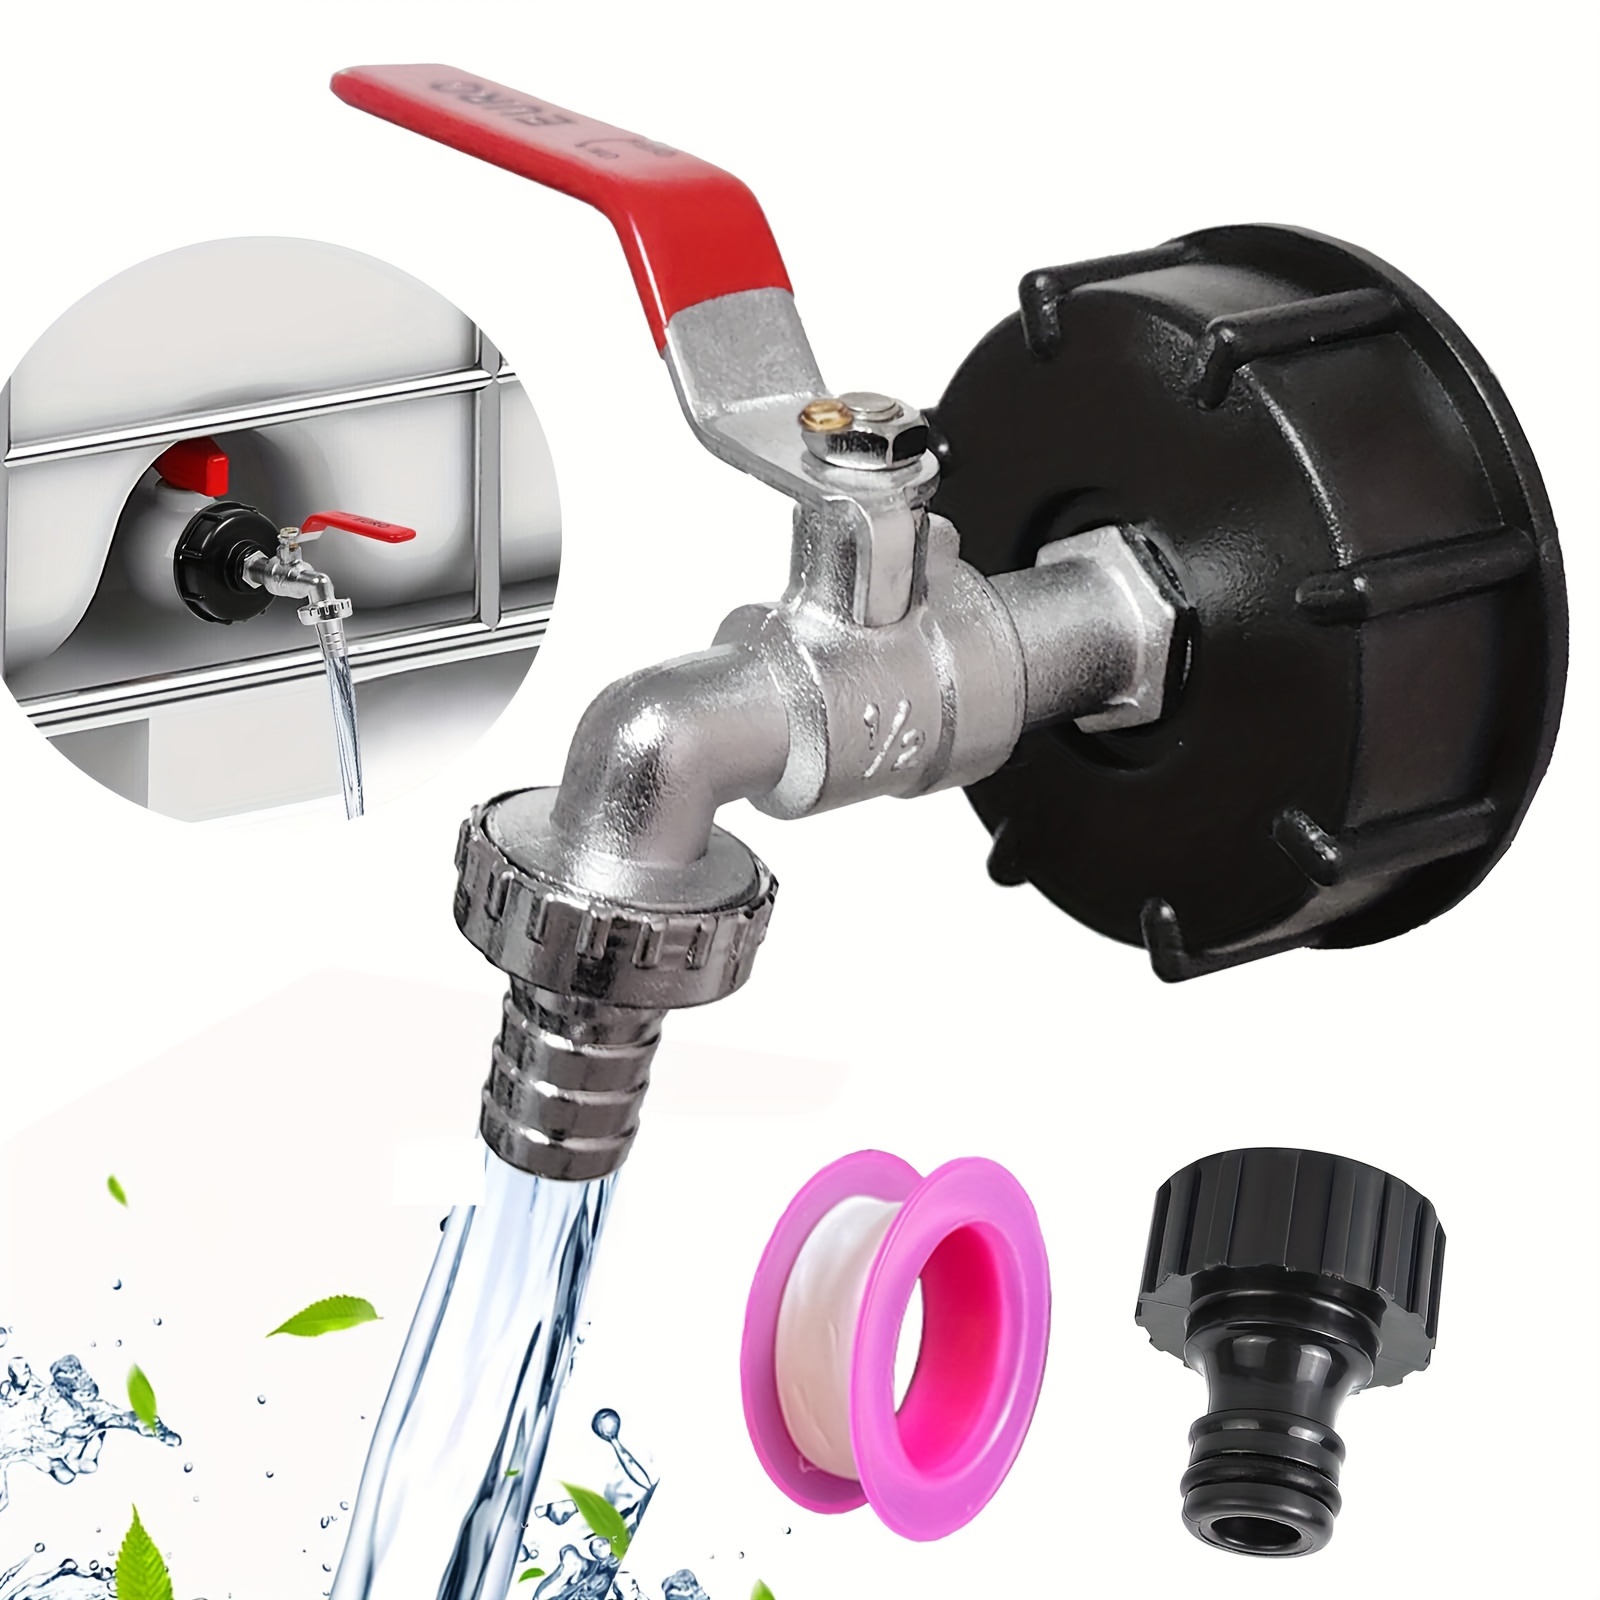 

Premium Alloy Ball Valve Ibc Outlet Tap - 1000l Water Tank Compatible With 1/2" Connection Adapter, Ideal For Rainwater & Garden Care